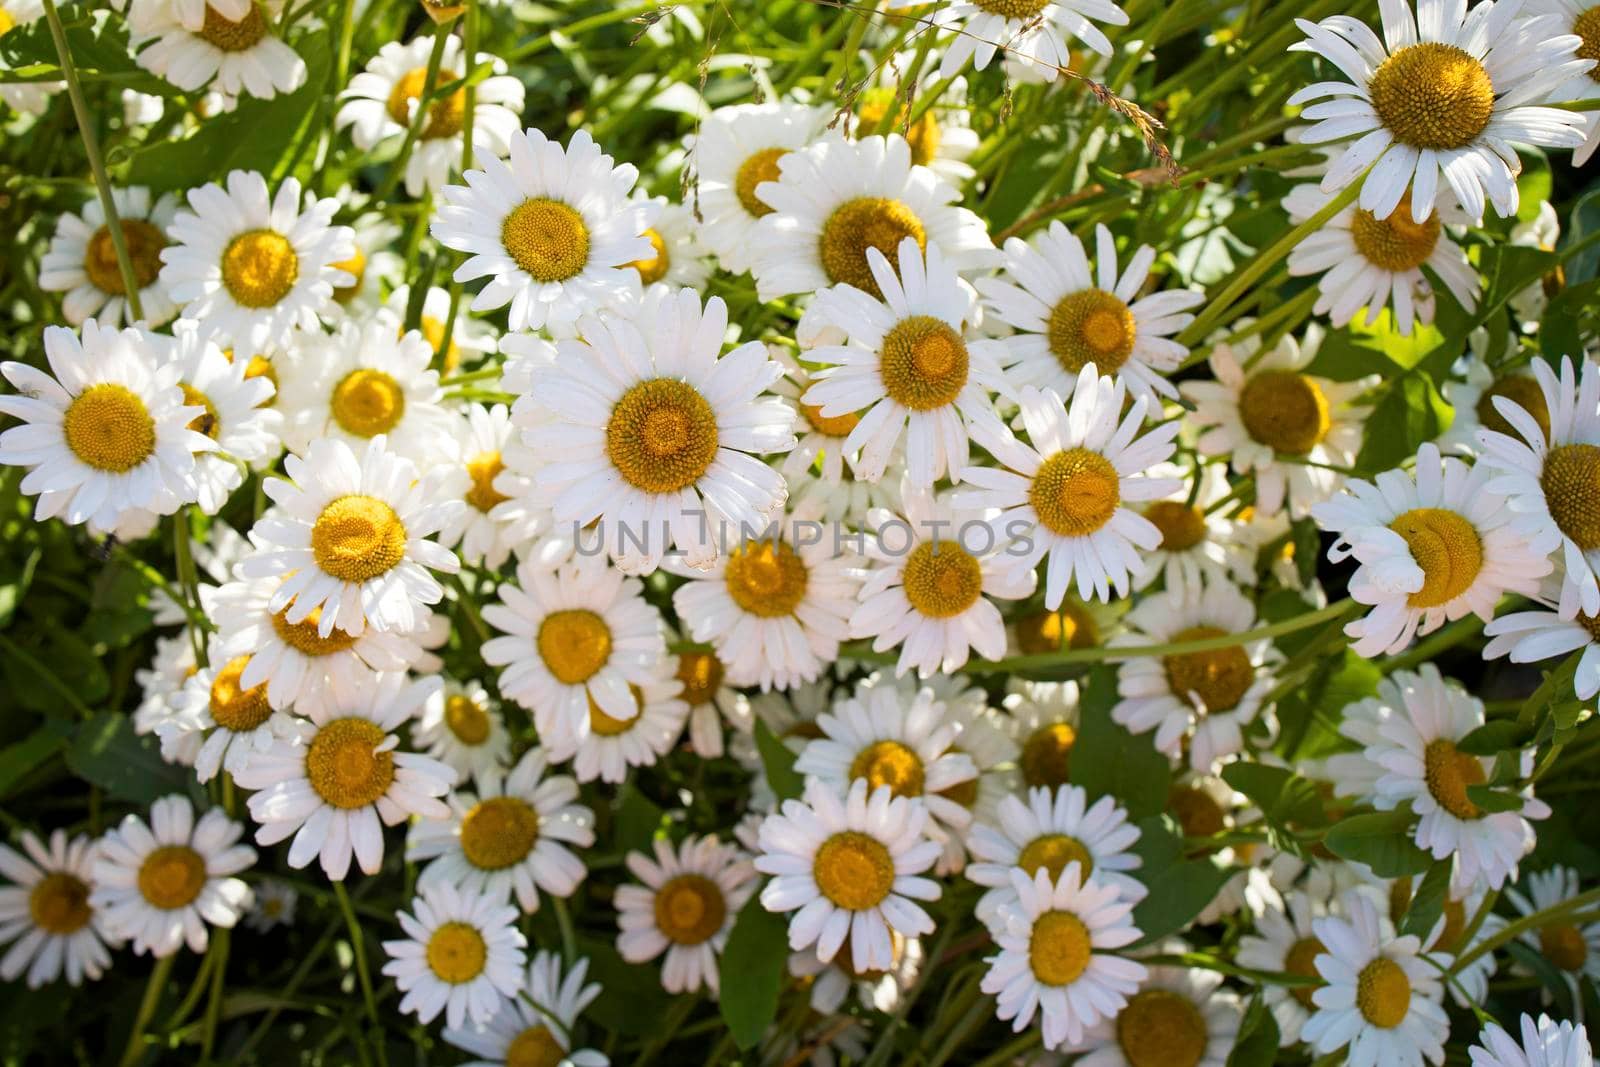 Field of garden daisies is on a sunny day